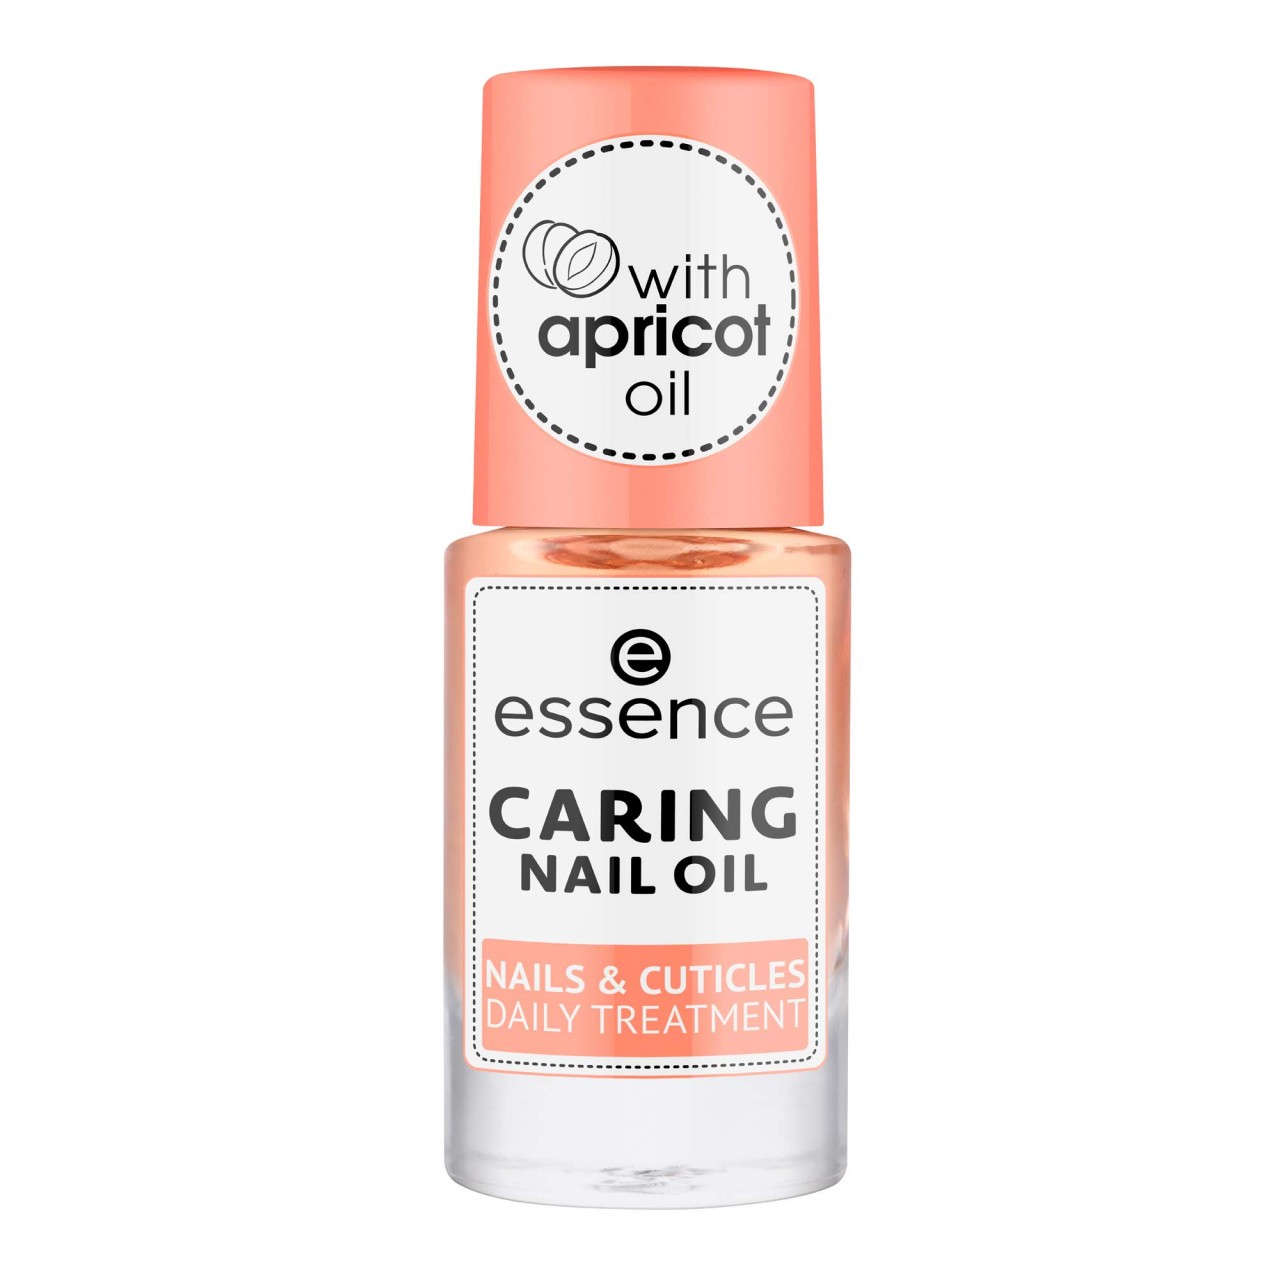 ESSENCE - Caring Nail Oil - 